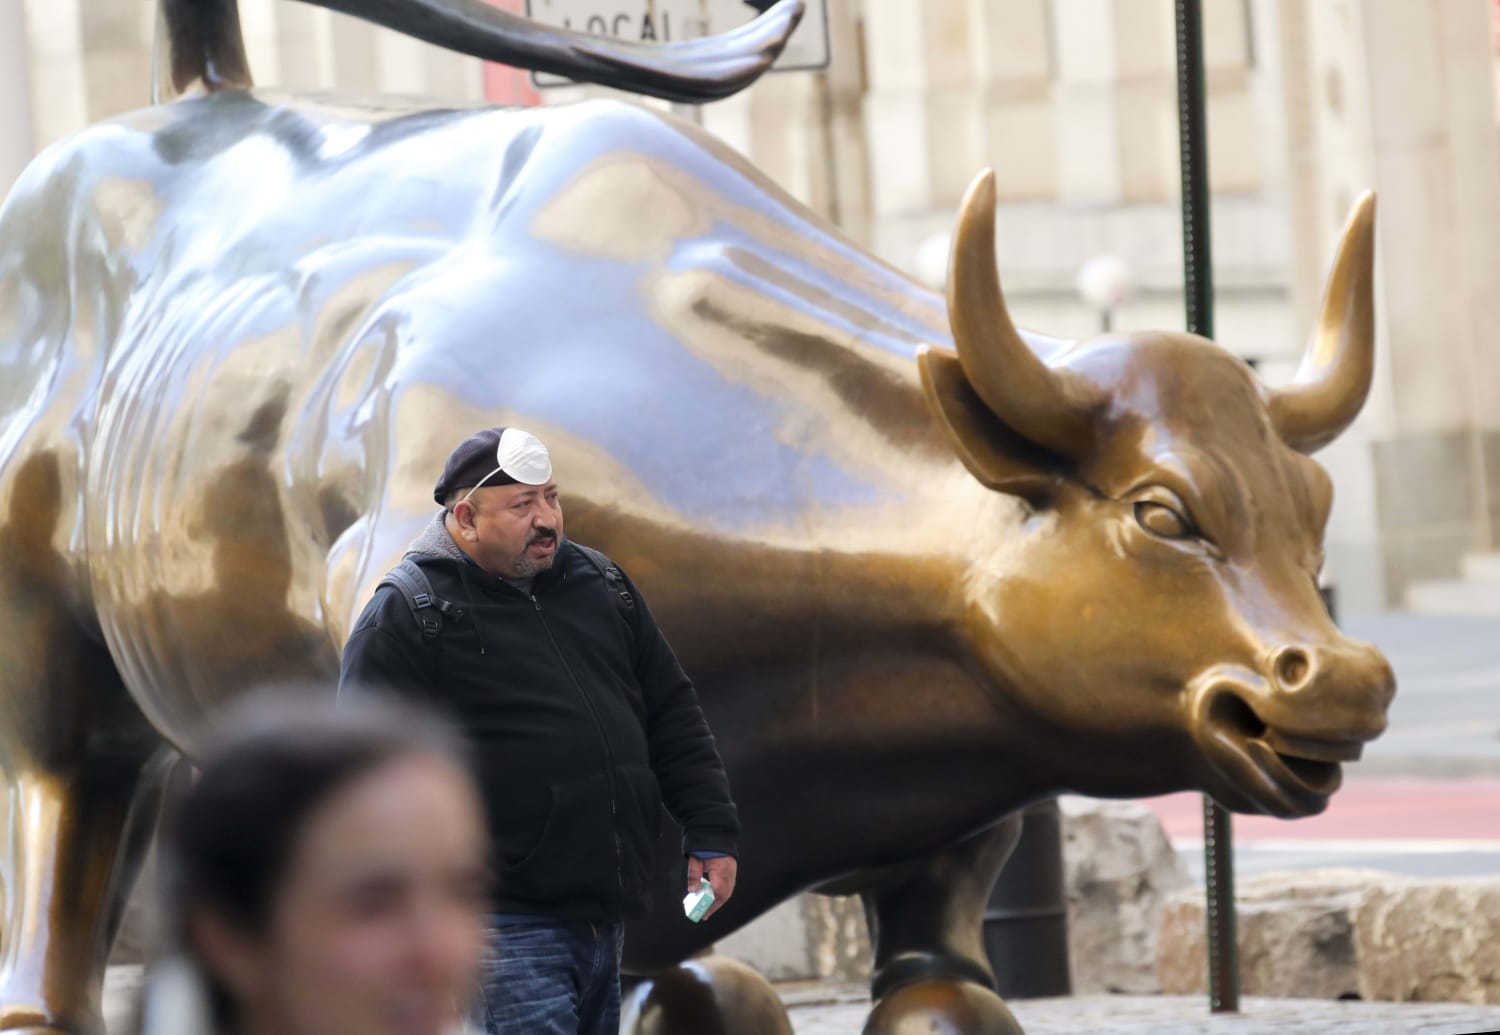 Bear market rally or new bull? Breaking down the market after another winning week